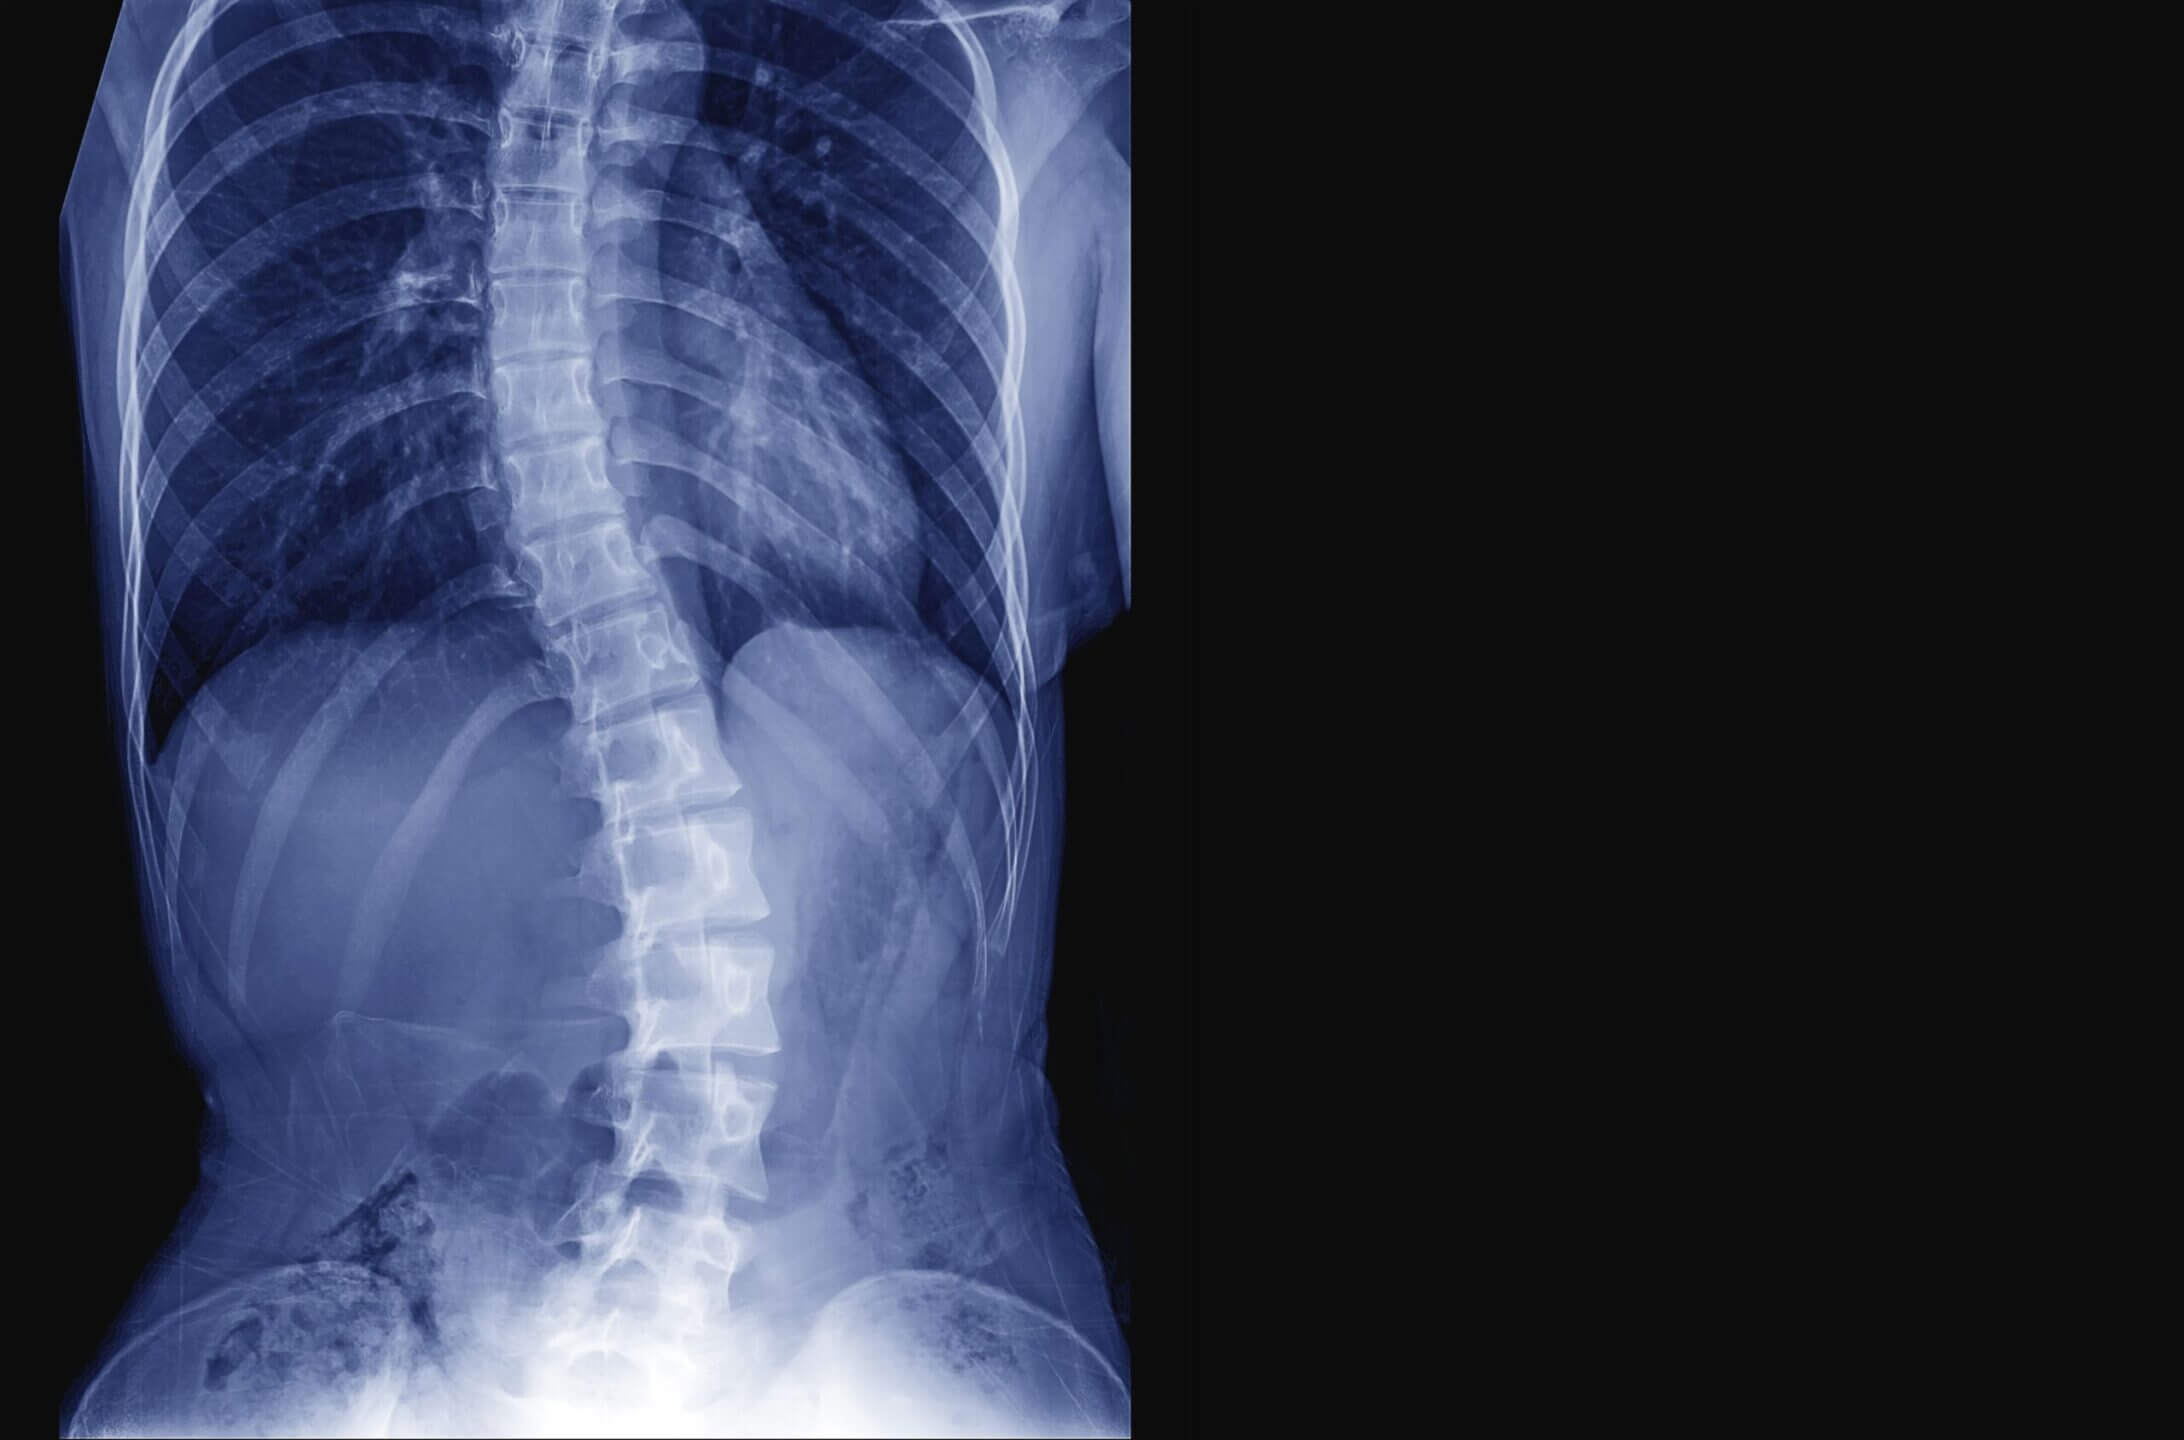 scoliosis of the spine